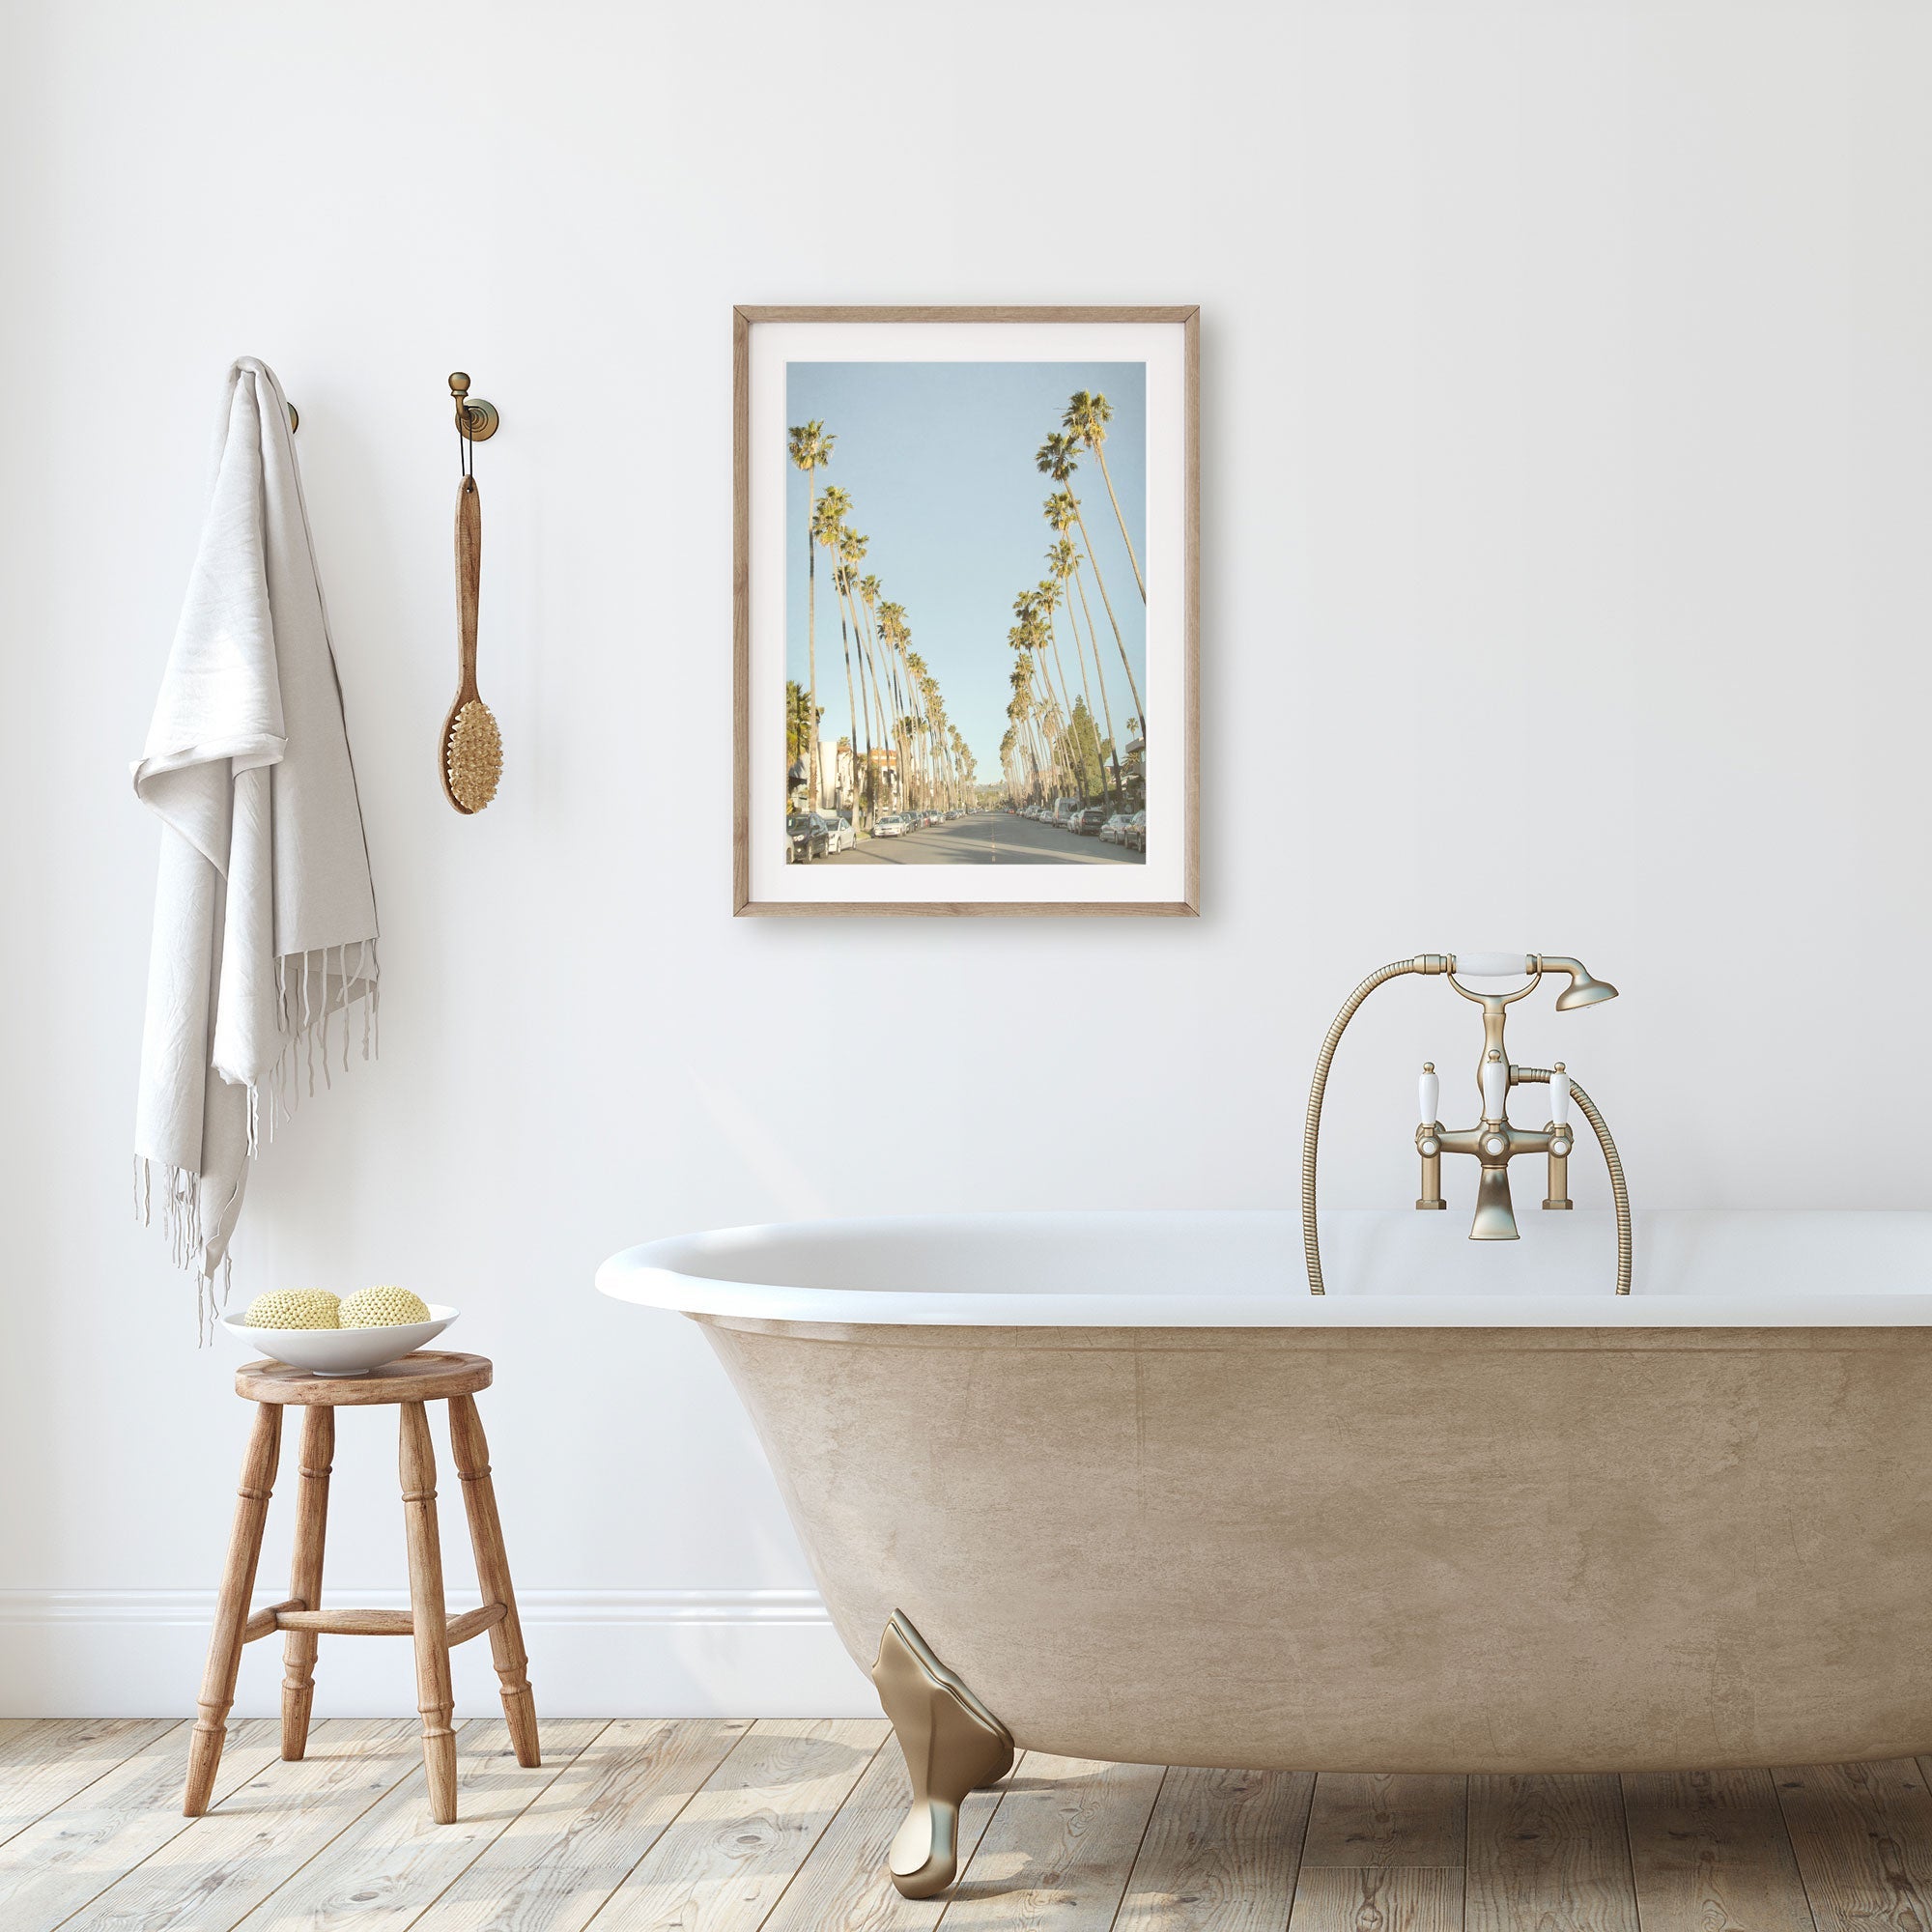 A minimalist bathroom featuring a clawfoot bathtub, golden faucets, a wooden stool with towels, and a framed painting of Los Angeles Palm Tree Lined Street &#39;Sunset Boulevard Dreams&#39; by Offley Green on the wall.